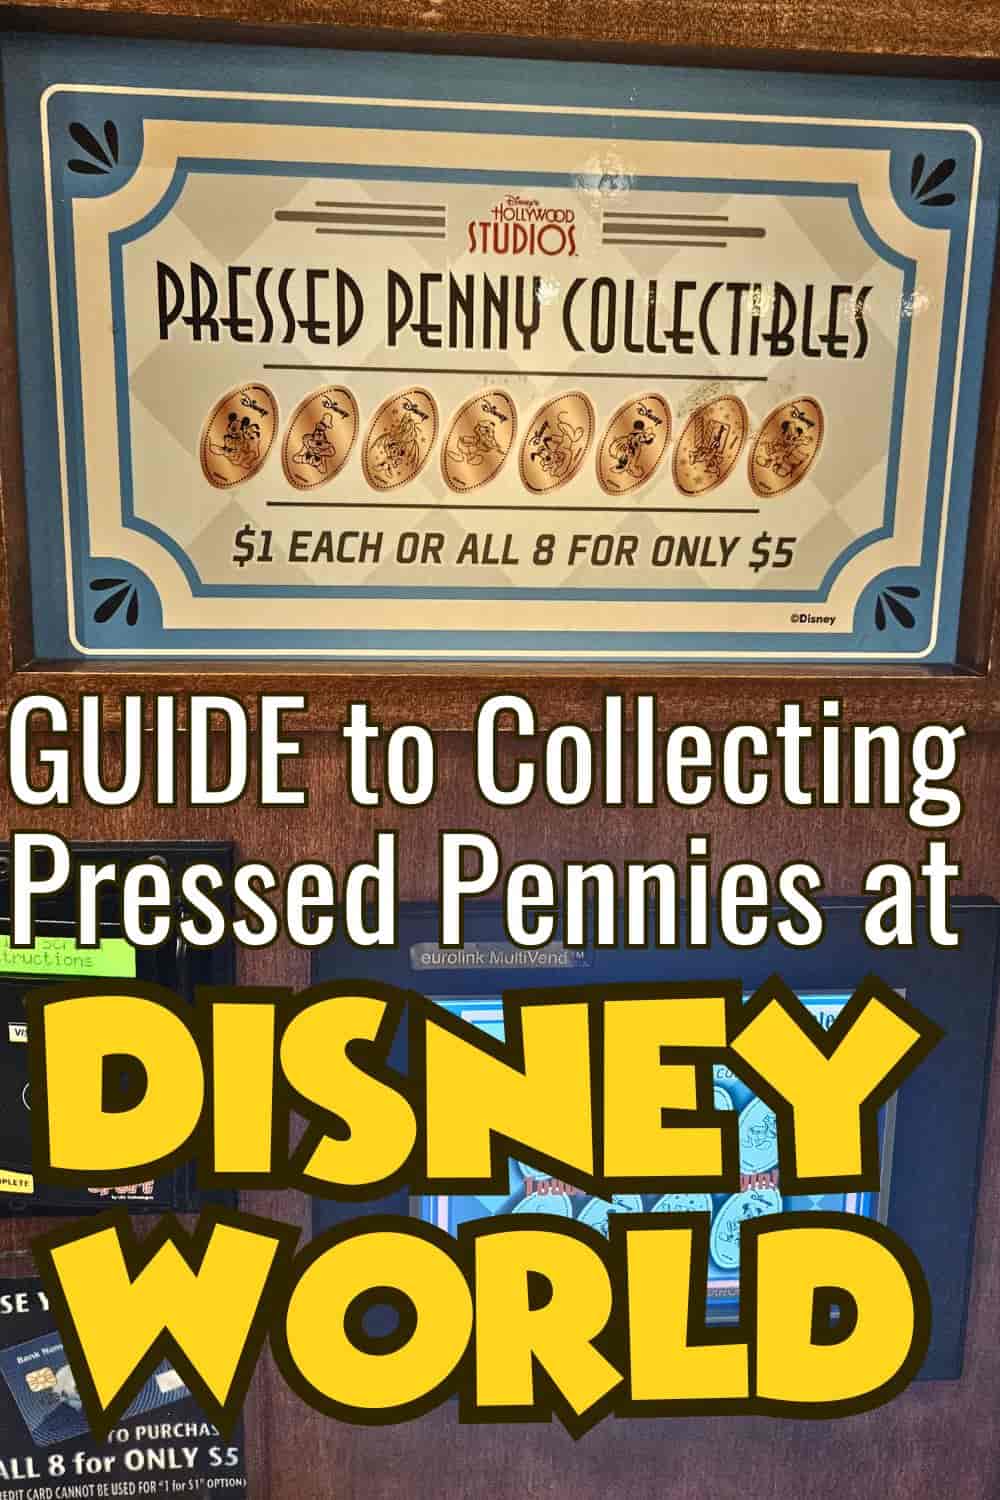 Guide to Collecting Disney Pressed Pennies